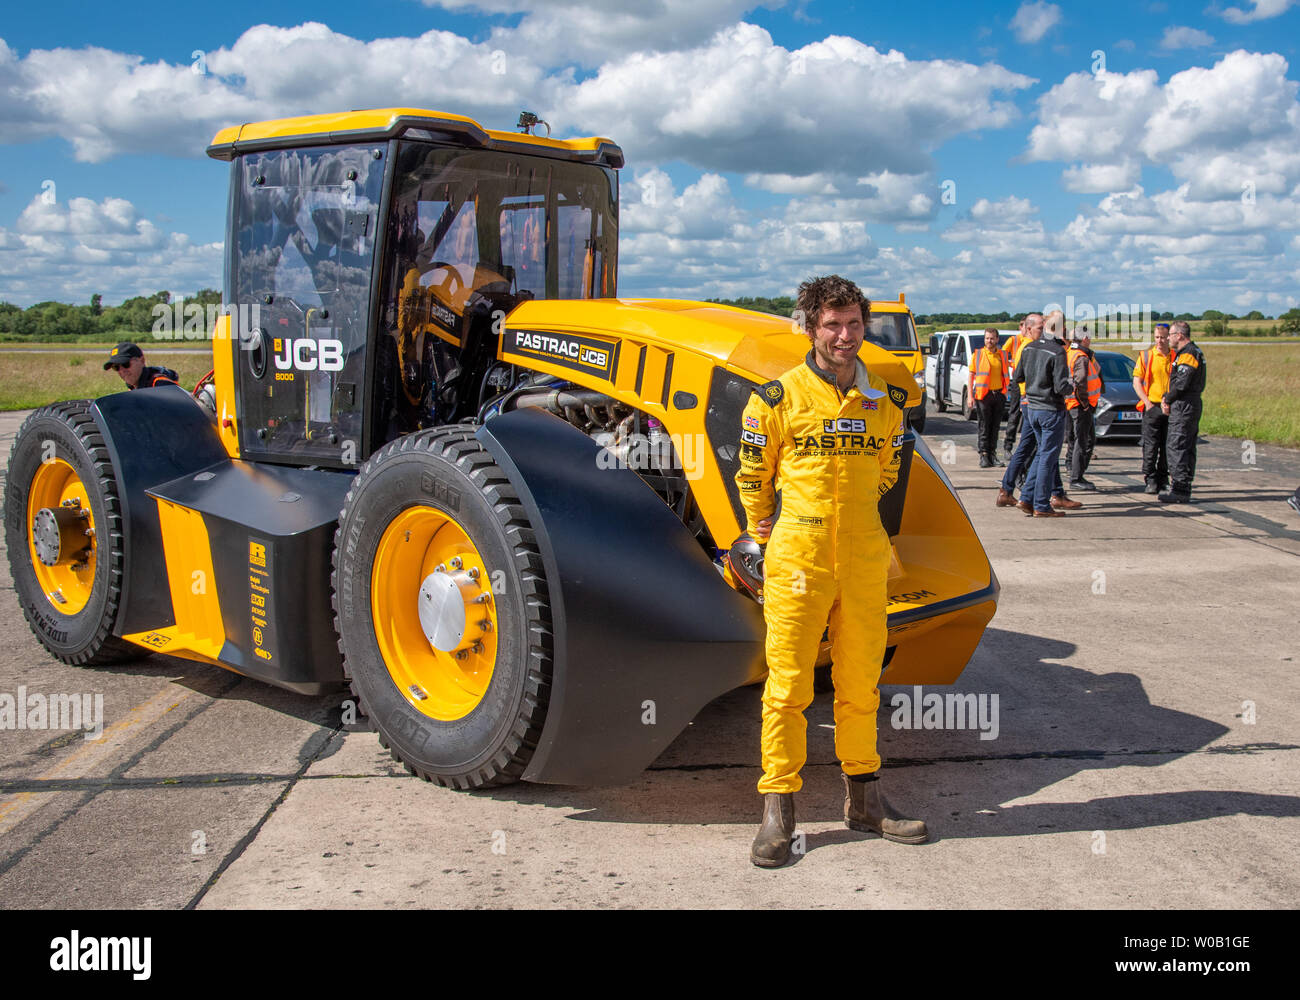 JCB Sets Record for World's Fastest Tractor After Going 150 Mph